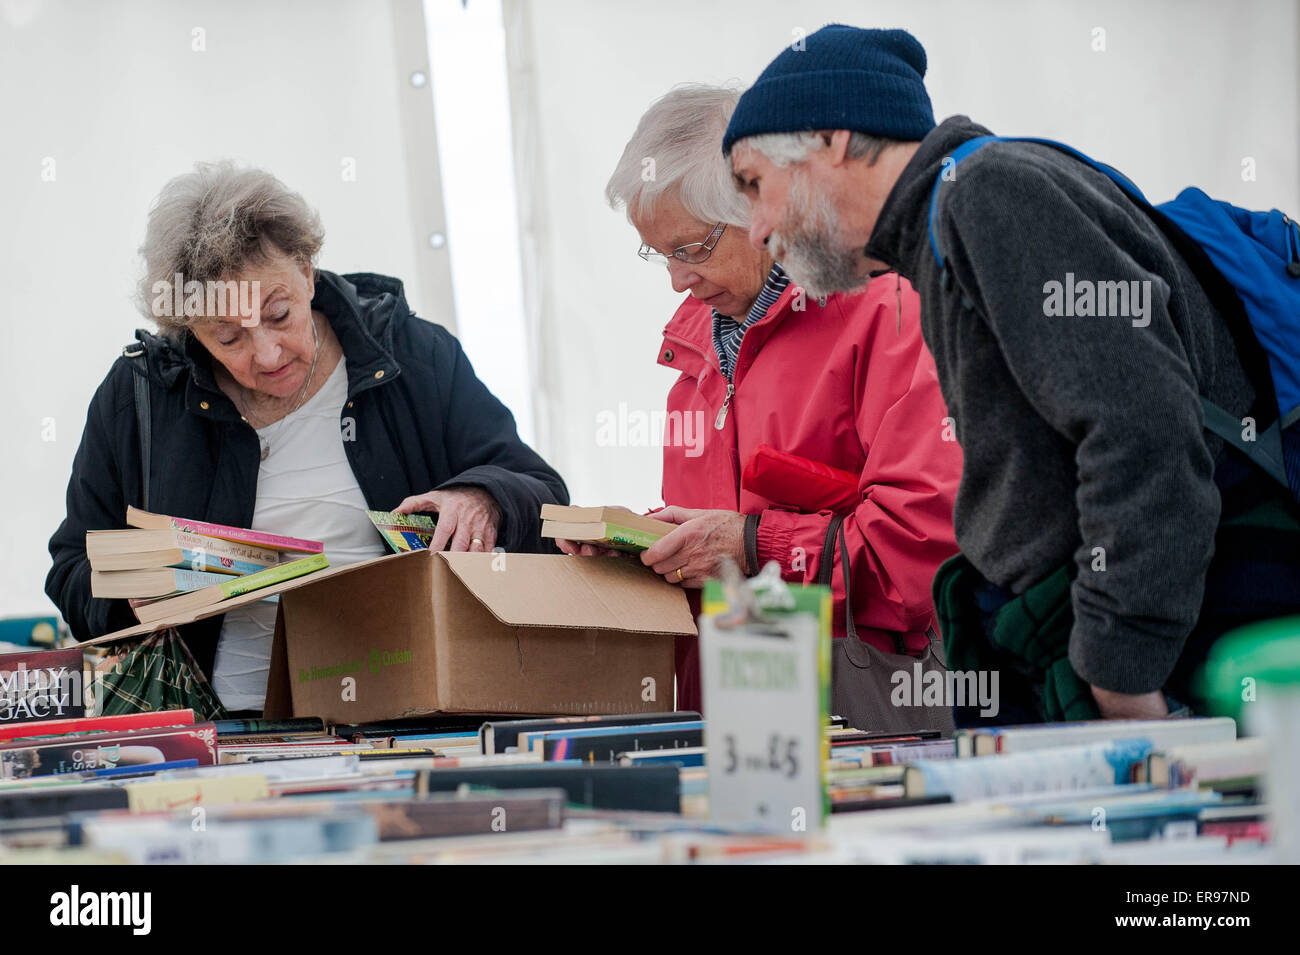 Hay on Wye, UK. Thursday 28 May 2015  Pictured: Poeple browse books at the Hay Festival  Re: The 2015 Hay Festival takes place in Hay on Wye, Powys, Wales Stock Photo